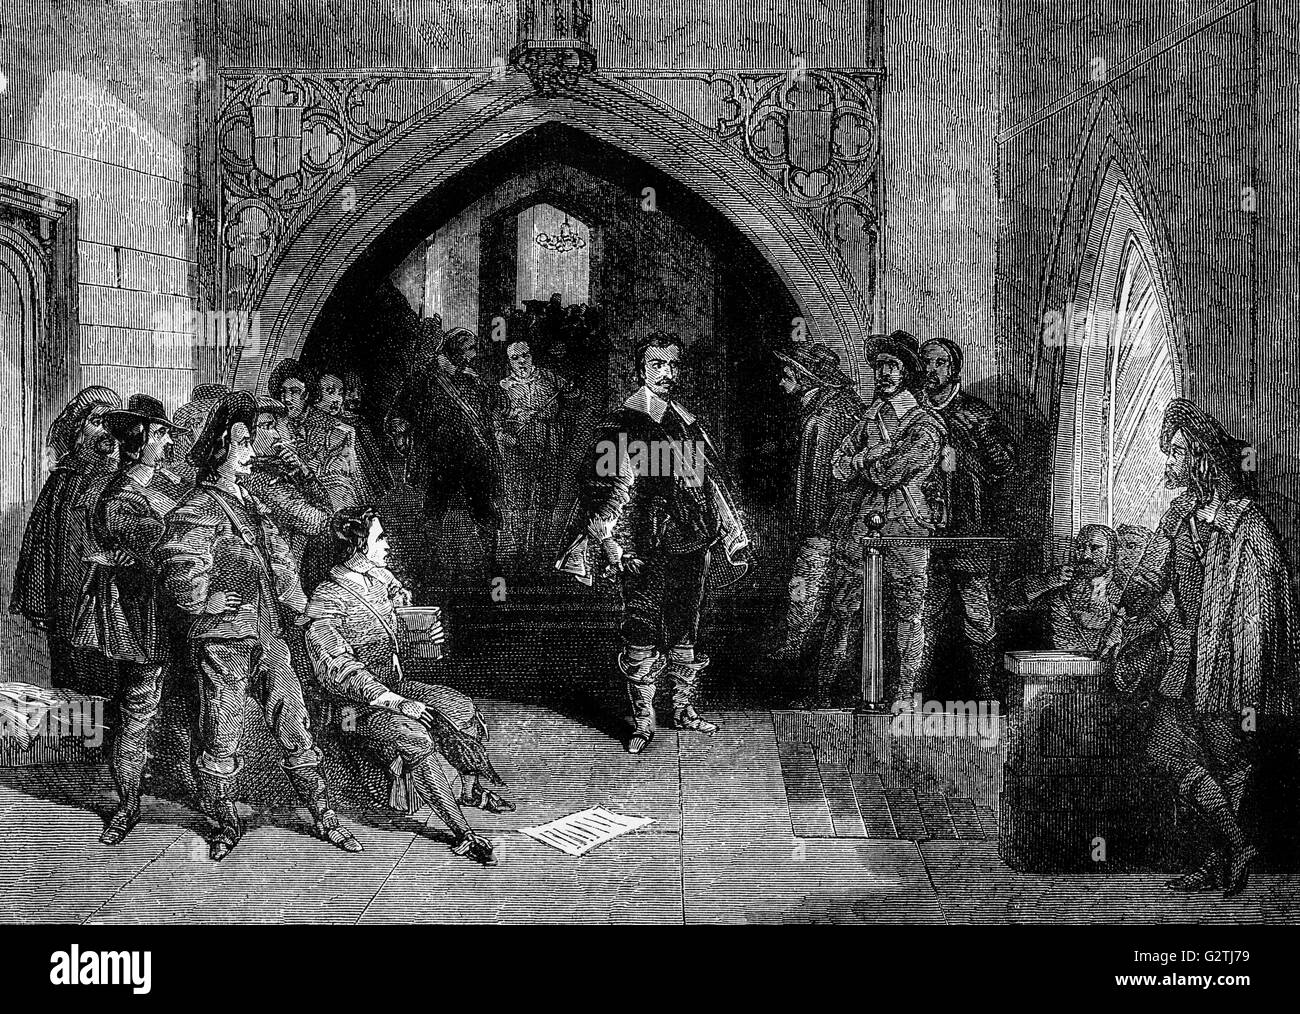 The arrest of Thomas Wentworth, 1st Earl of Strafford.  He was an English statesman and a major figure in the period leading up to the English Civil War; he was a supporter of King Charles I. Stock Photo